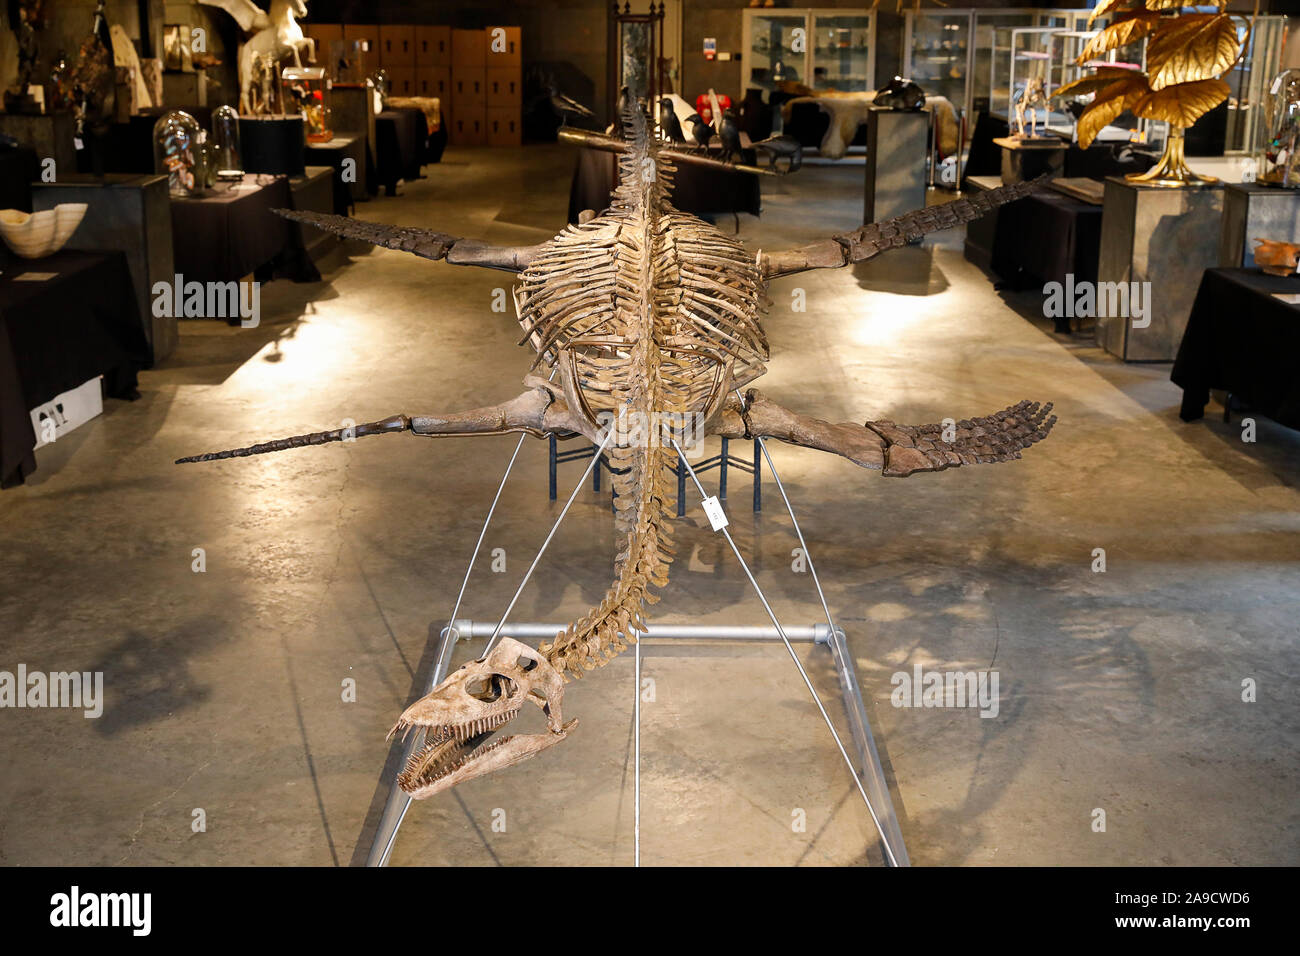 Stane Street, Billingshurst. 14th November 2019. A set of very rare artefacts for sale at Summer's Place Auctions in Billingshurst, West Sussex, as part of their ‘Evolution' collection. An extremely rare Plesiosaur, Cryptclidus eumymerus, which is expected to fetch £25000 to £40000 at auction. This specimen was found in Oxford clay near Peterborough and dates to the Jurassic period. Credit: james jagger/Alamy Live News Stock Photo